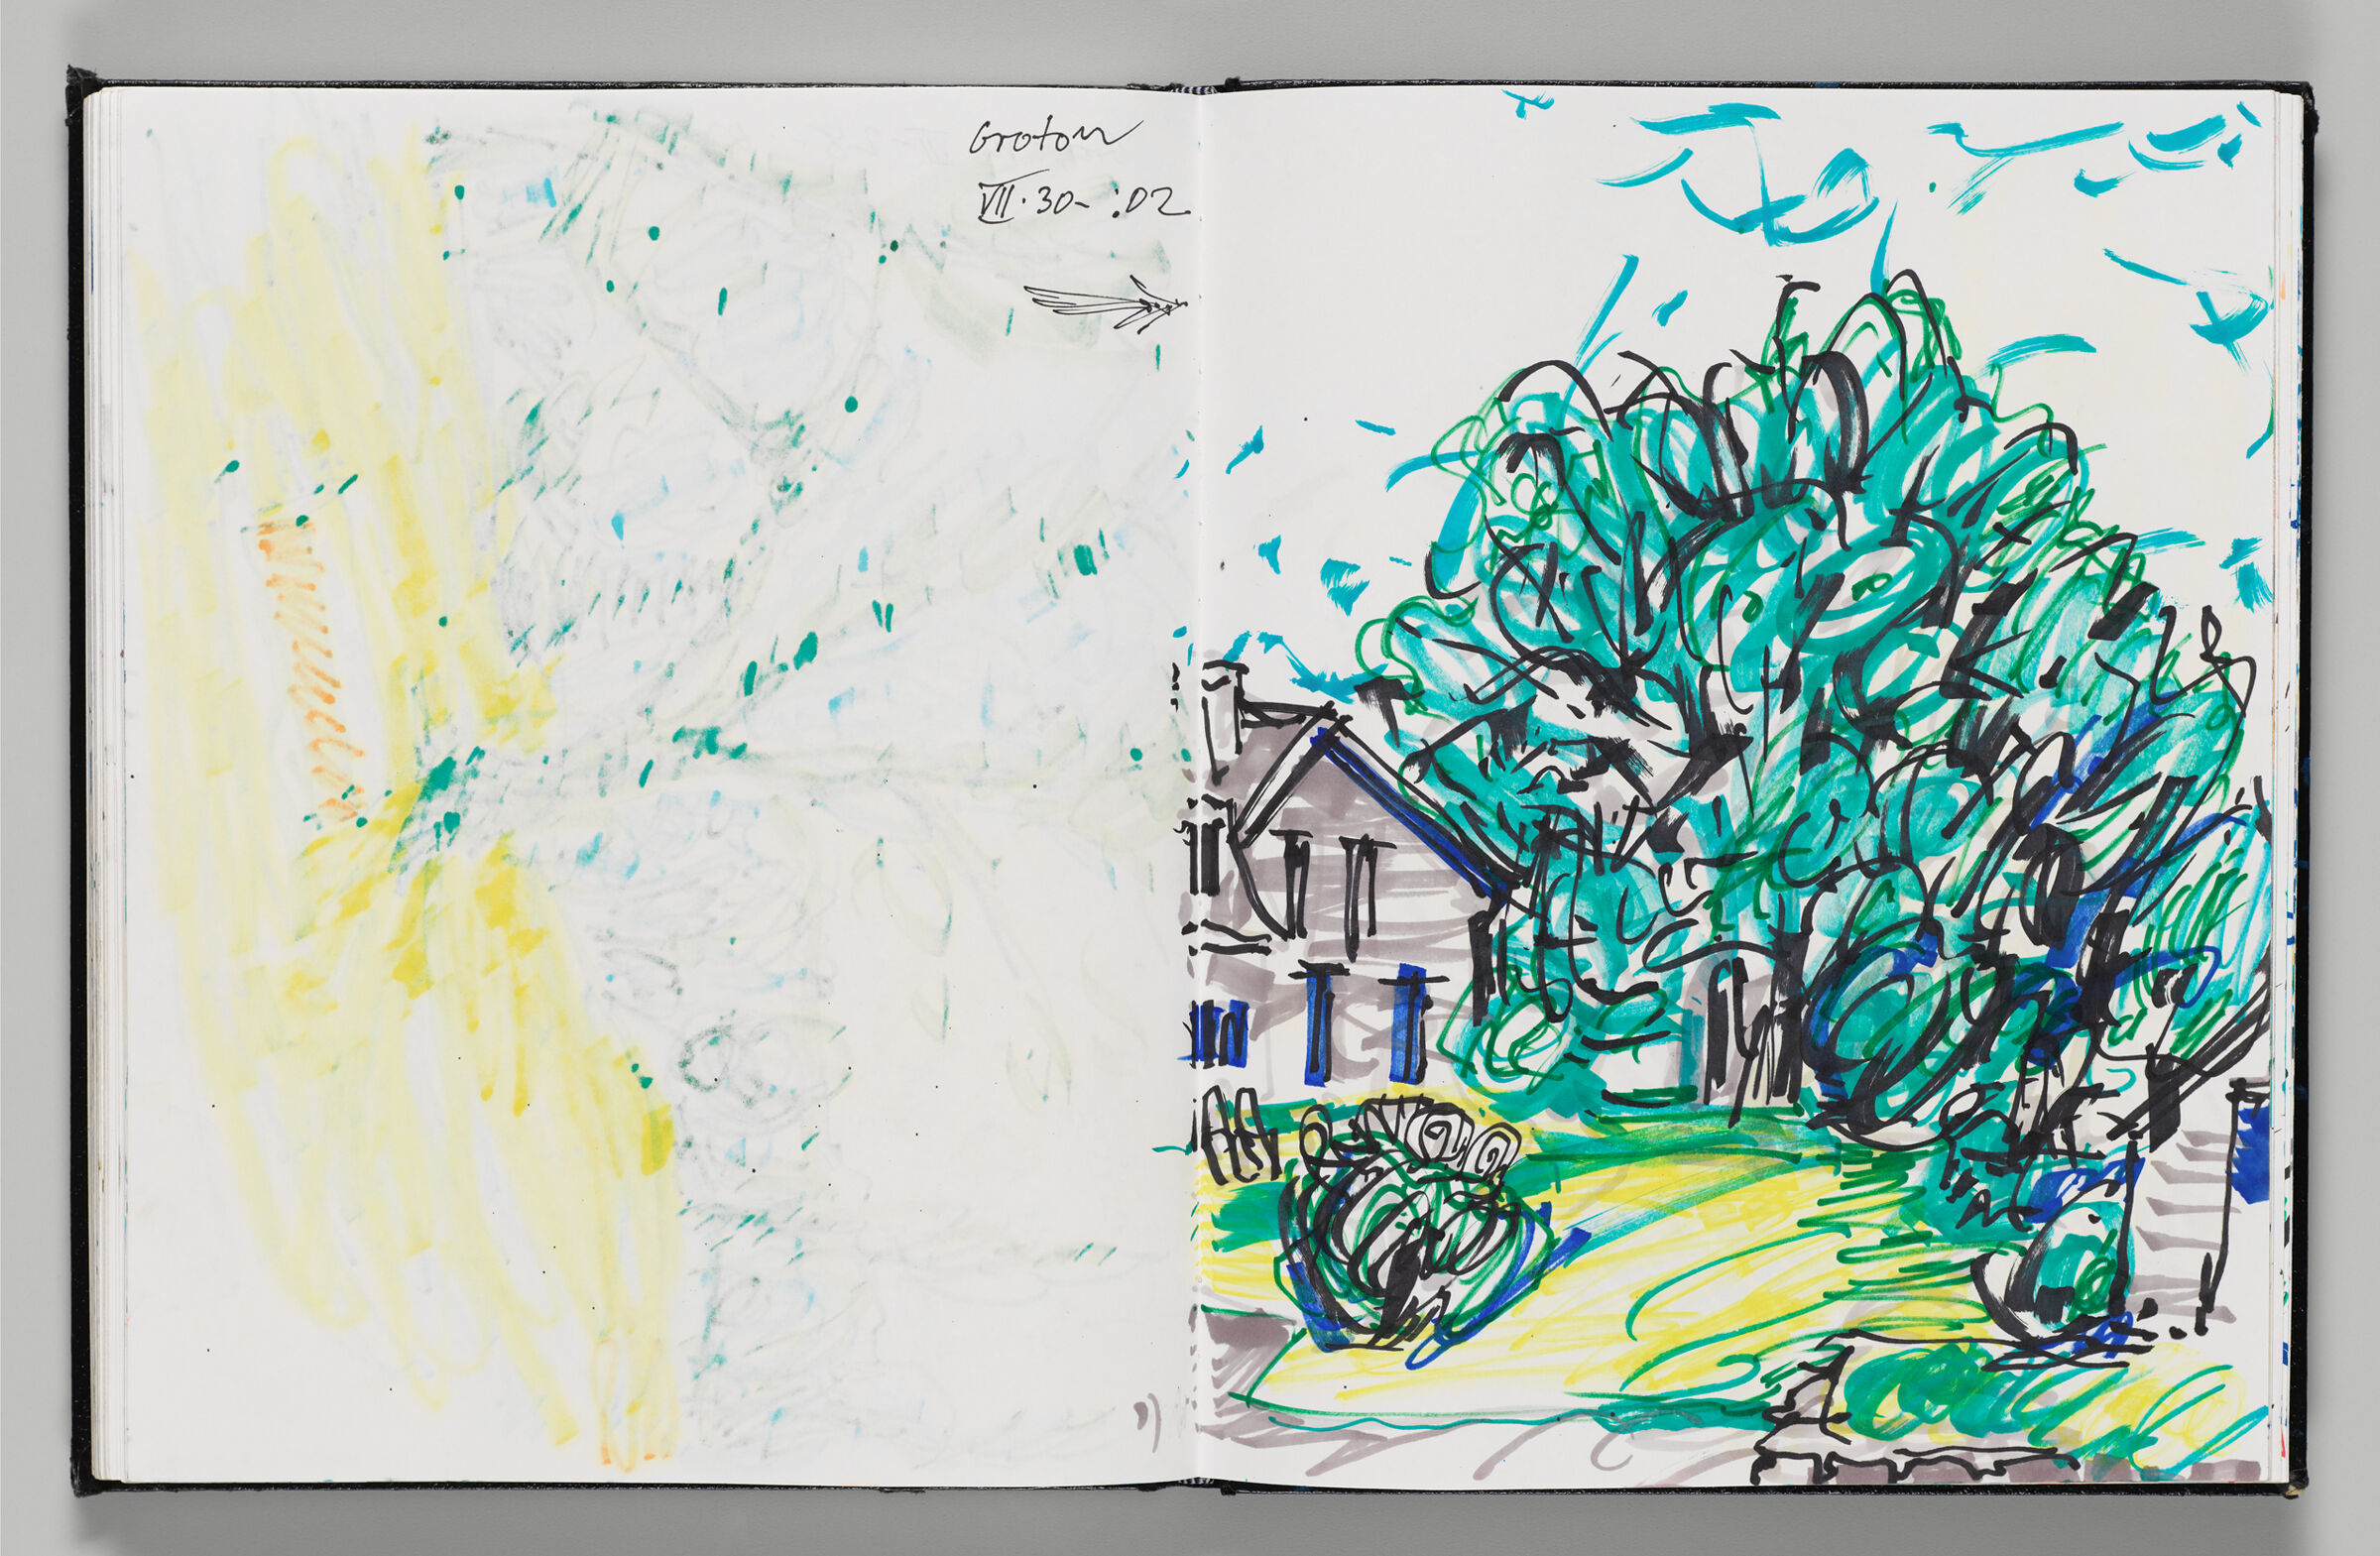 Untitled (Bleed-Through Of Previous Page, Left Page); Untitled (Groton Farm And Landscape, Right Page)